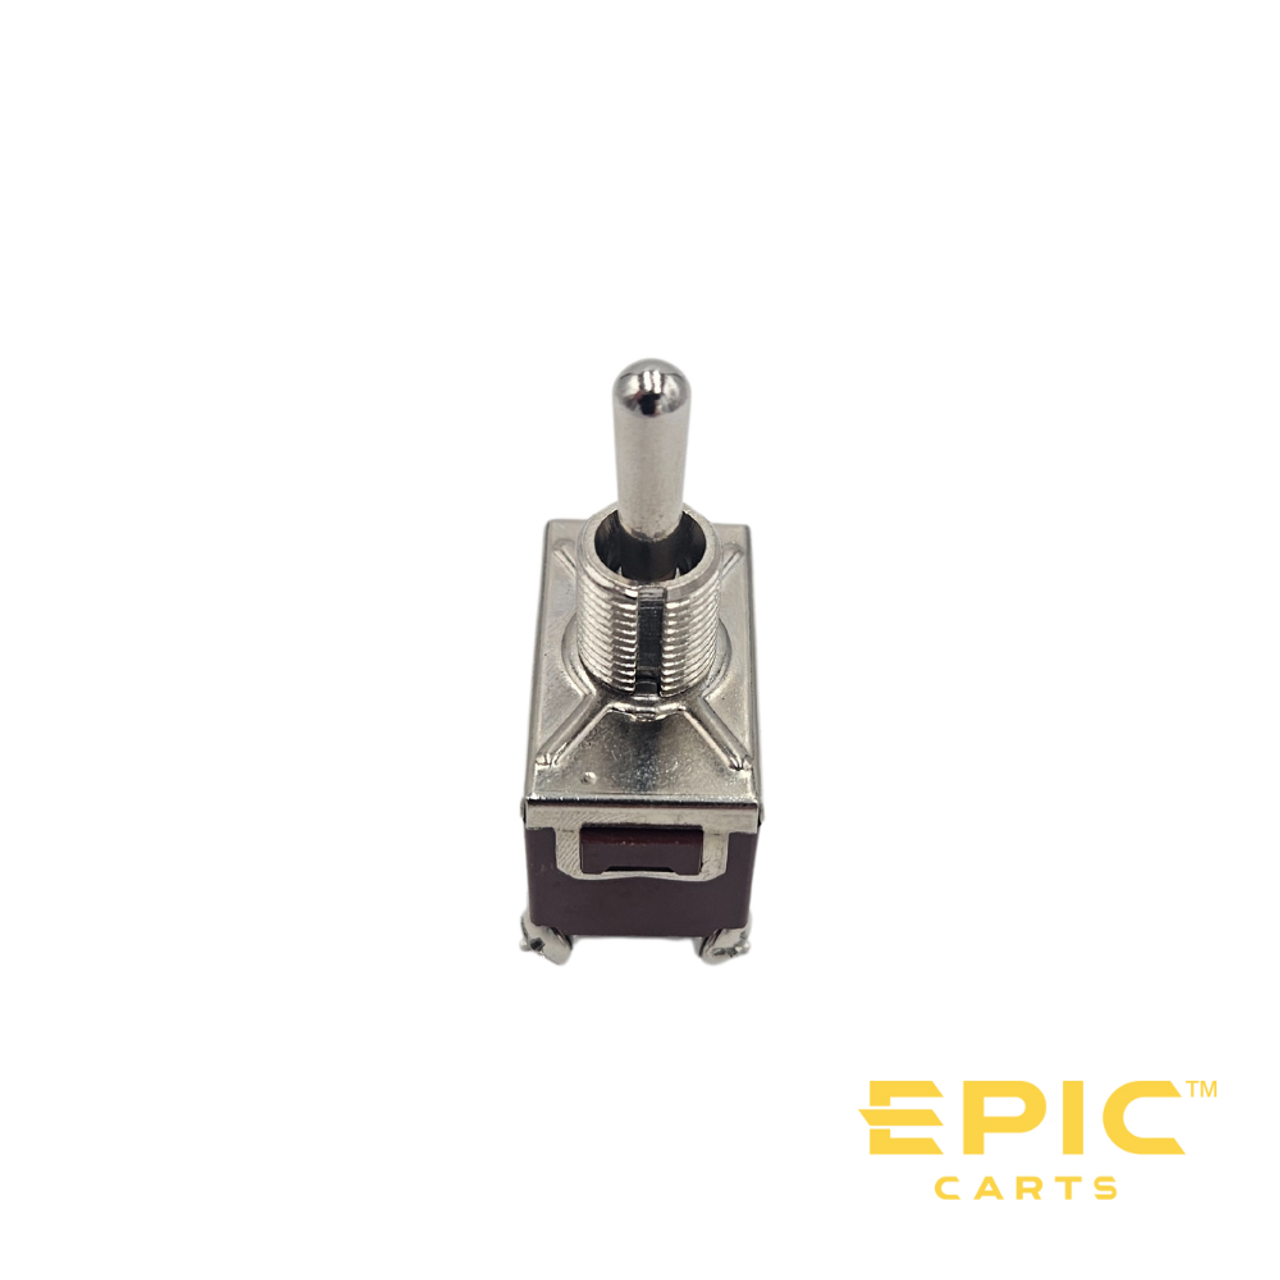 Run and Tow Switch for EPIC Golf Cart, ELE-EP212, 3210020001